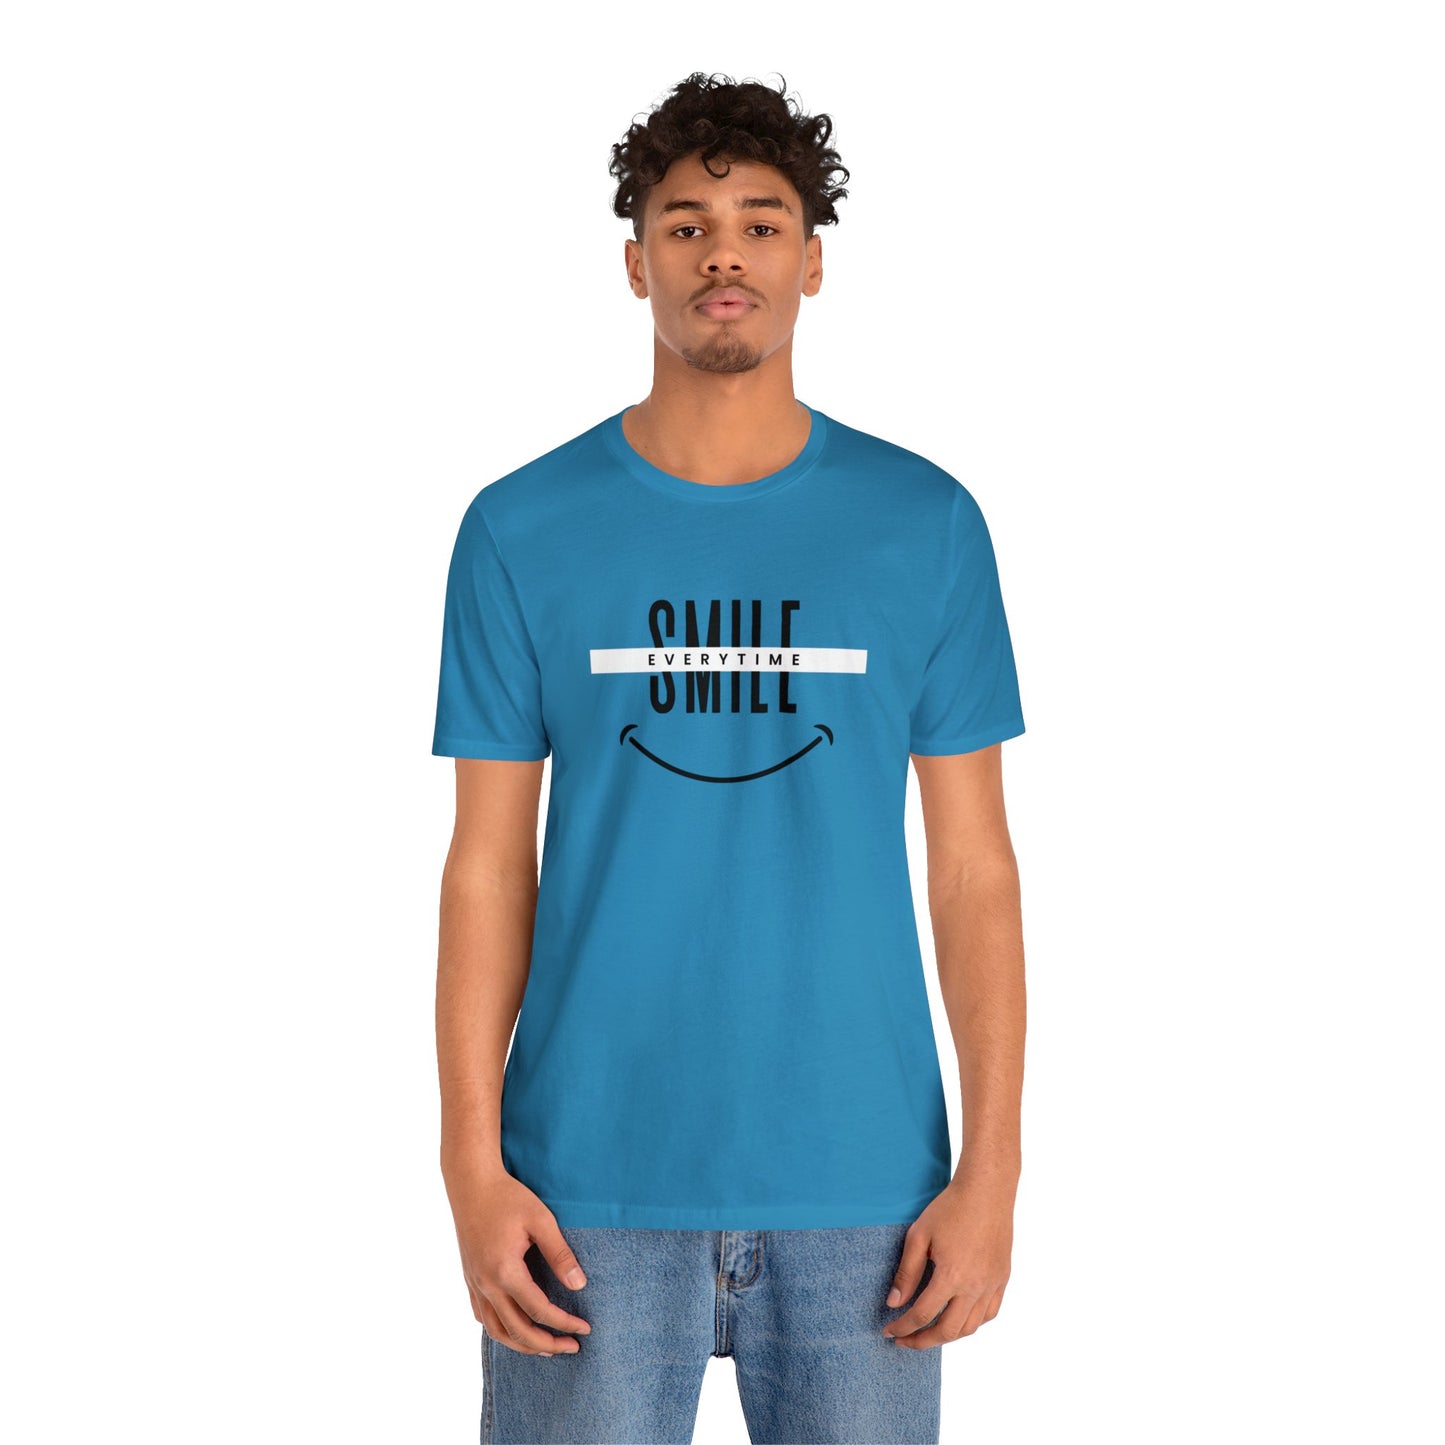 'Smile Everytime' Unisex Cotton T-shirt - Human Rights Fighter Collection